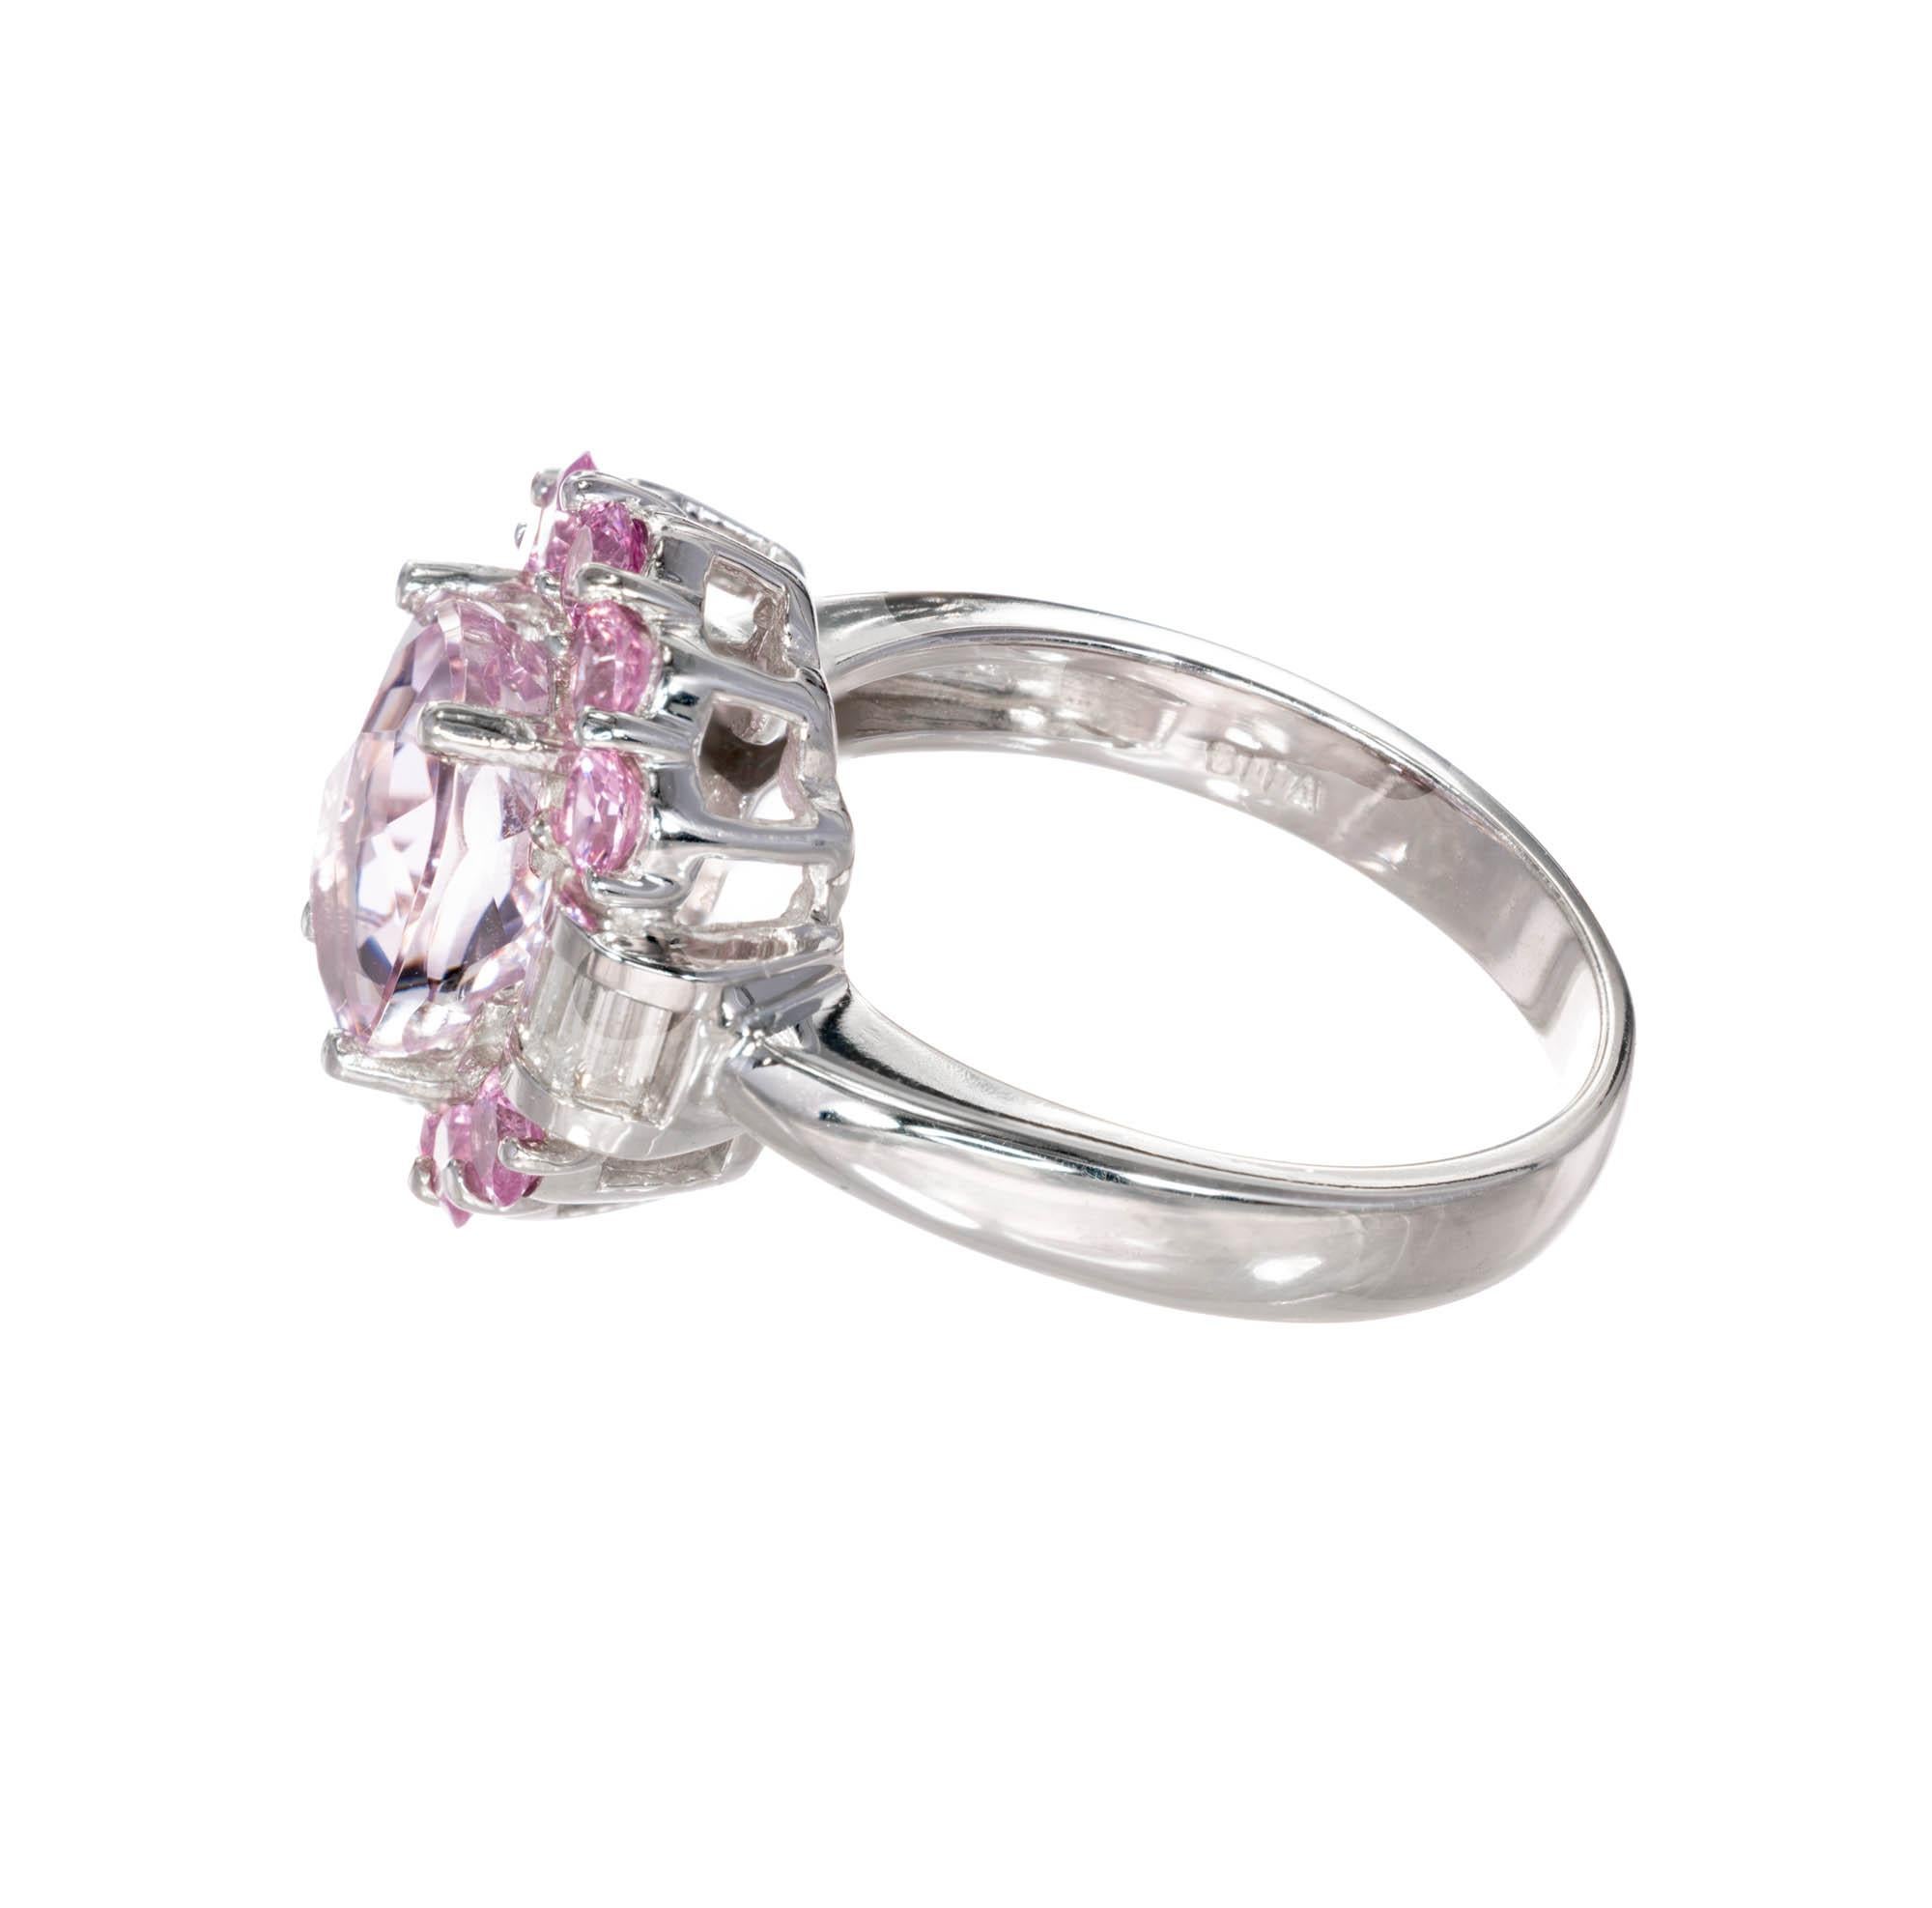 Oval Cut 2.75 Carat Amethyst Diamond Sapphire Halo White Gold Engagement Cocktail Ring For Sale